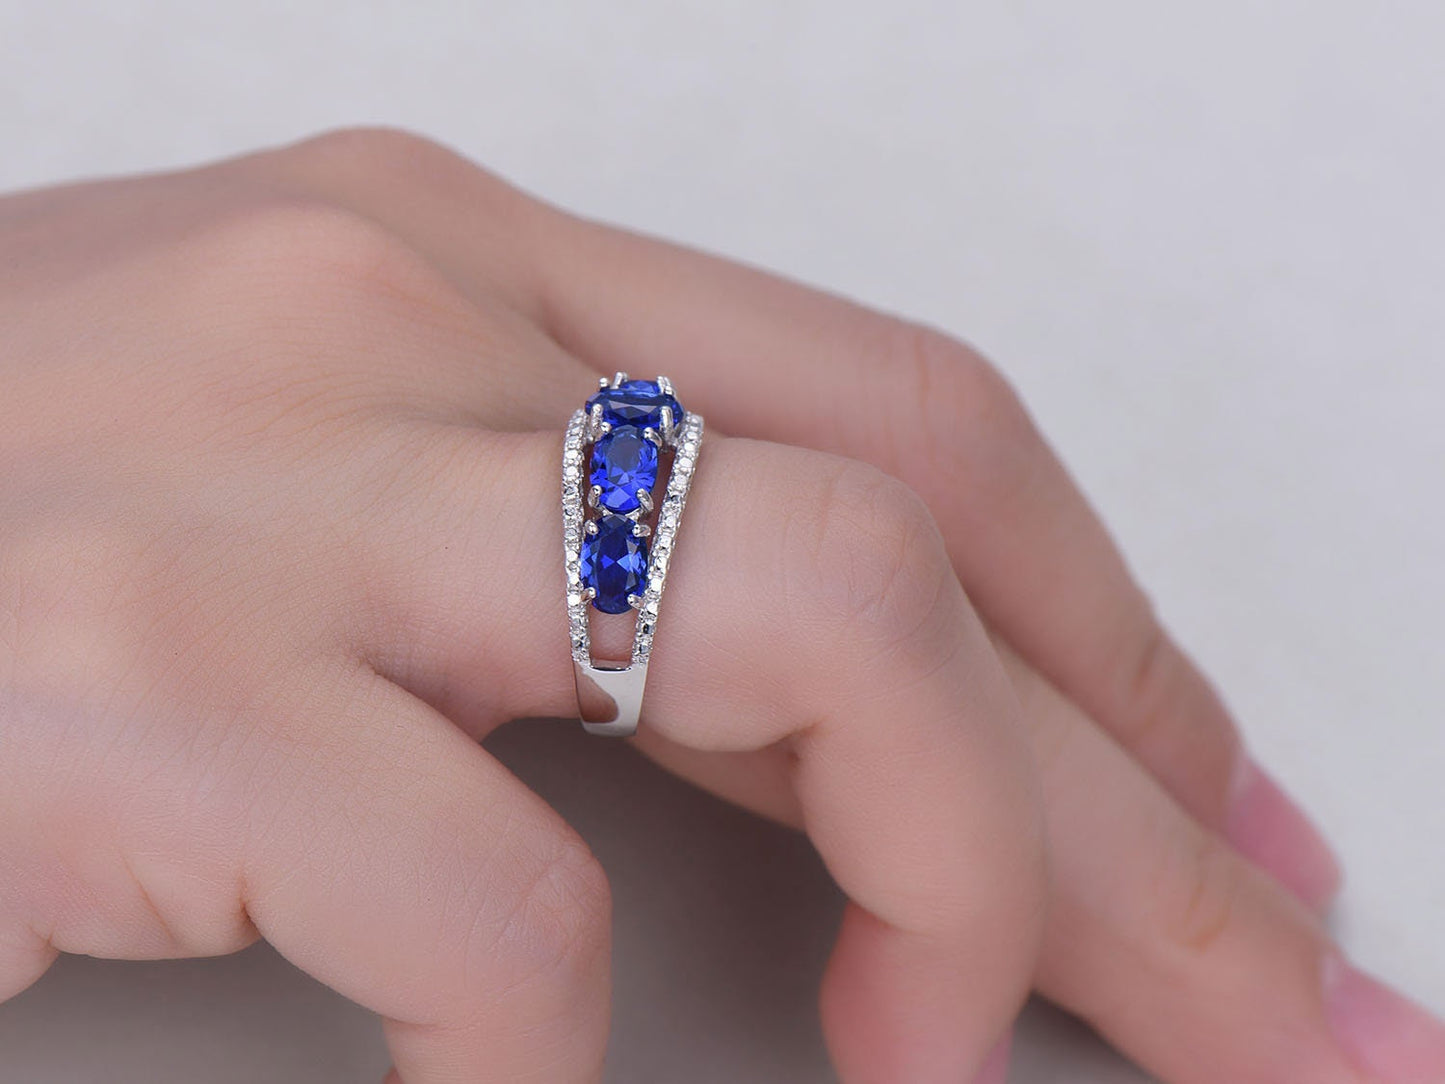 Blue sapphire wedding band for men white gold engagement ring 4x6mm oval cut lab created sapphire diamond promise ring solid 14k